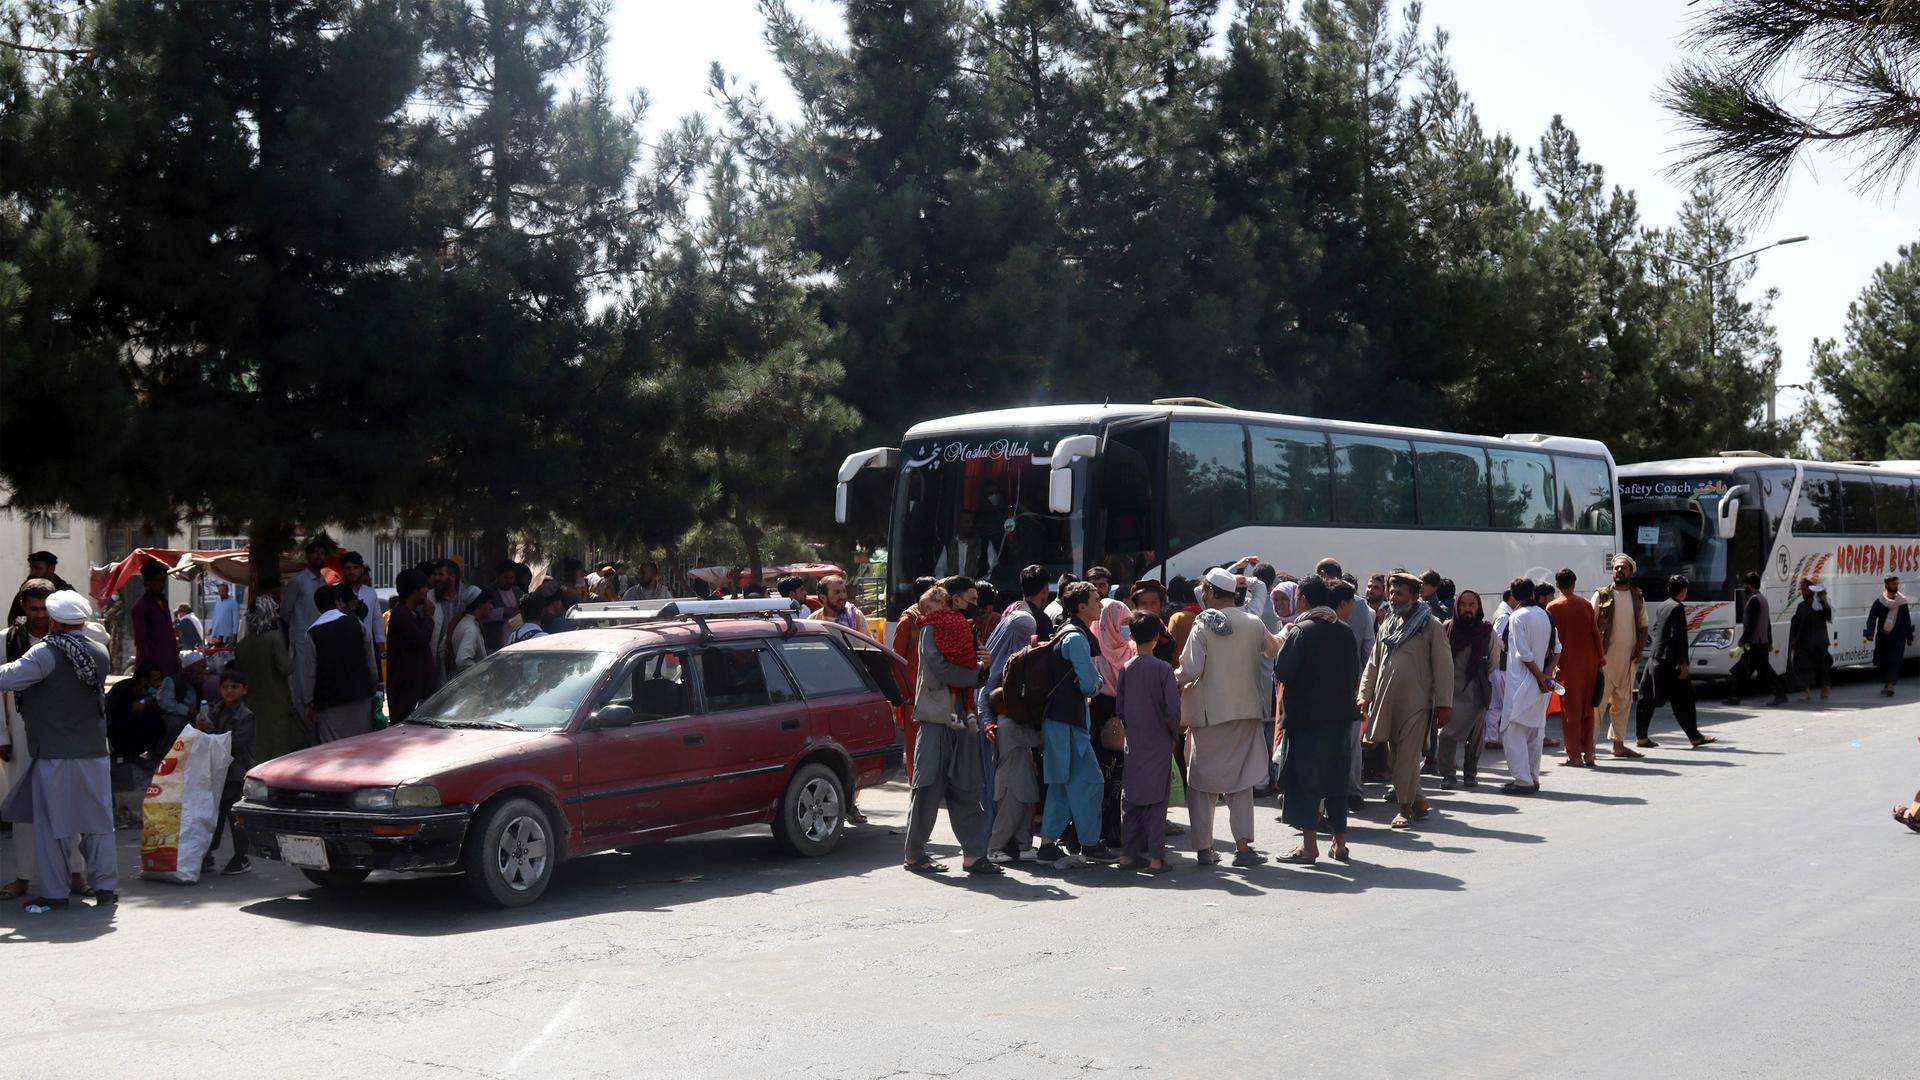 Hundreds of people, some holding documents, gather near an evacuation control checkpoint on the perimeter of the Hamid Karzai International Airport, in Kabul, Afghanistan, on Aug. 27, 2021.